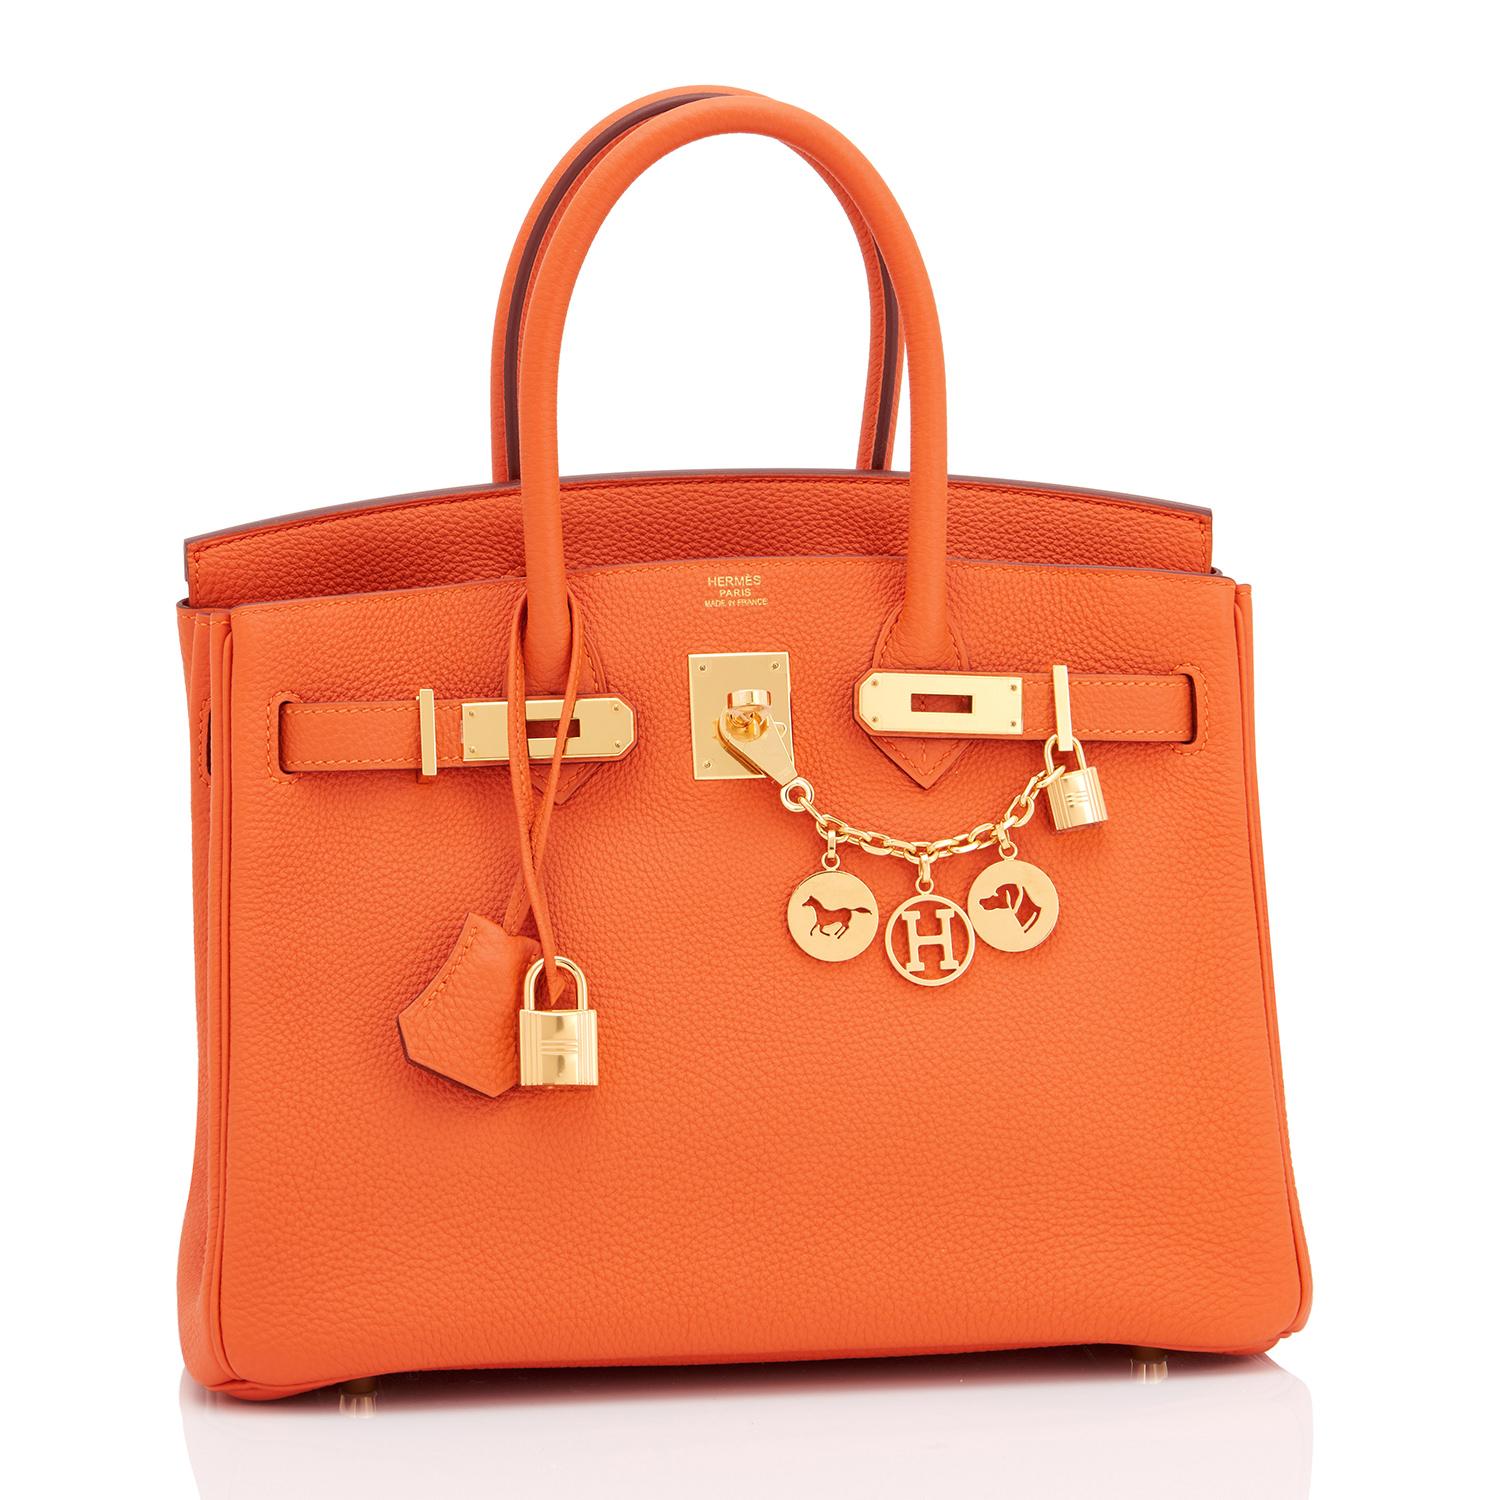 Hermes Feu Orange 30cm Birkin Togo Gold Hardware NEW
Spectacularly gorgeous combination! Feu Orange is very coveted and rare to find now.
Brand New in Box. Store fresh. Pristine condition (with plastic on hardware).
Perfect gift! Comes with keys,